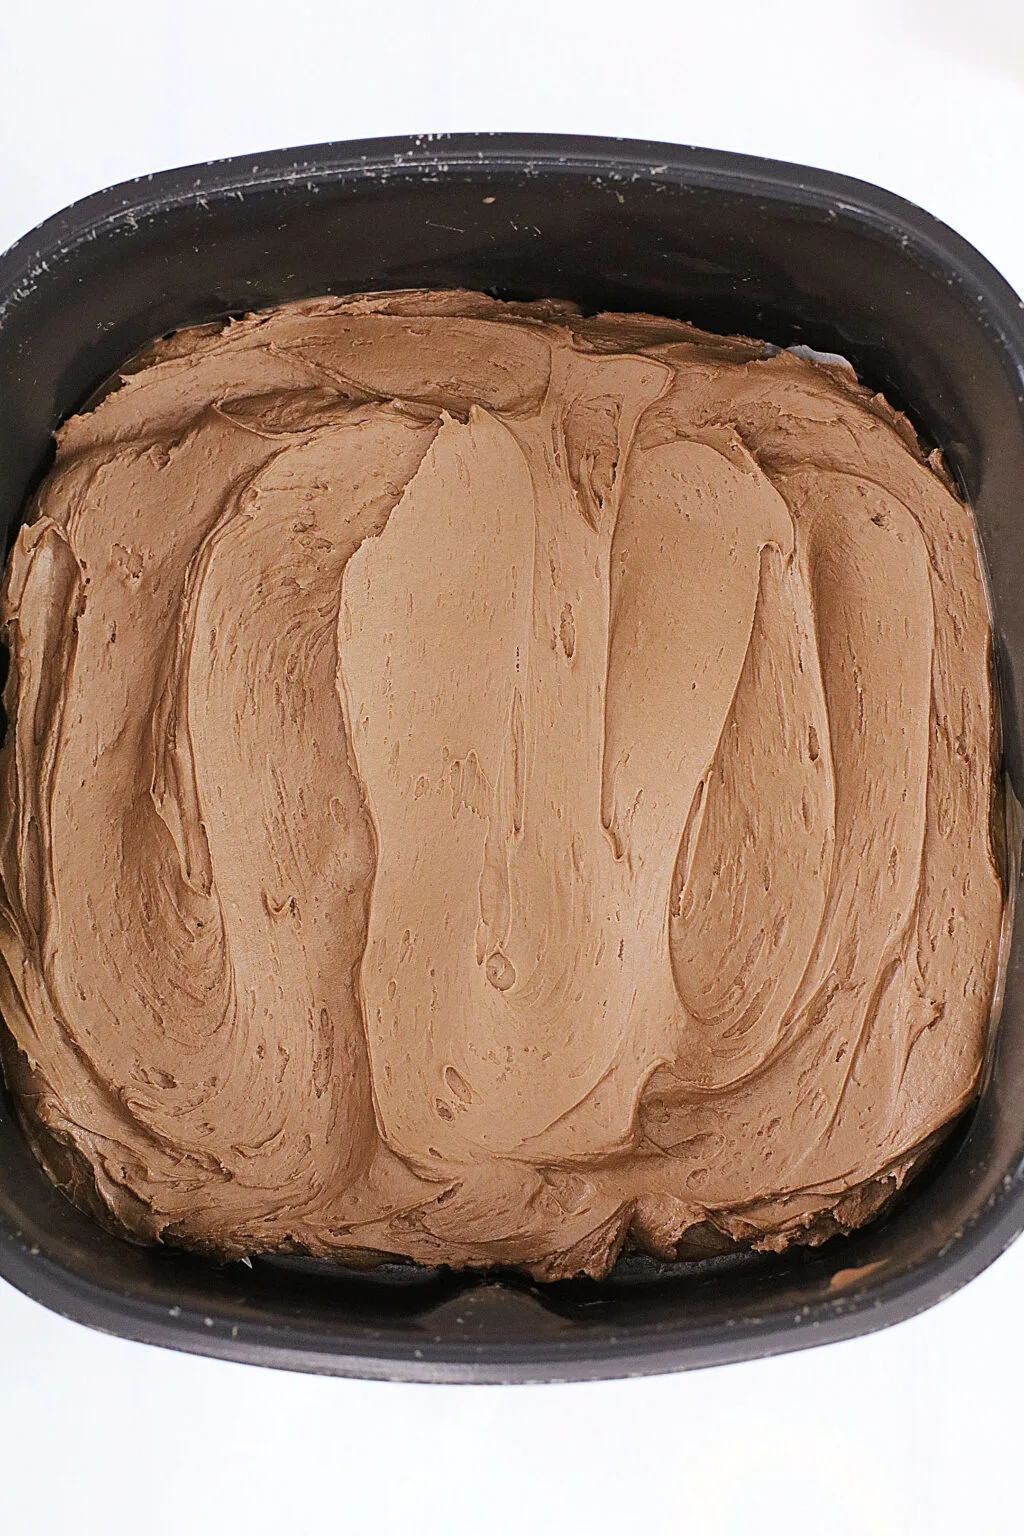 chocolate frosting covering baked brownies